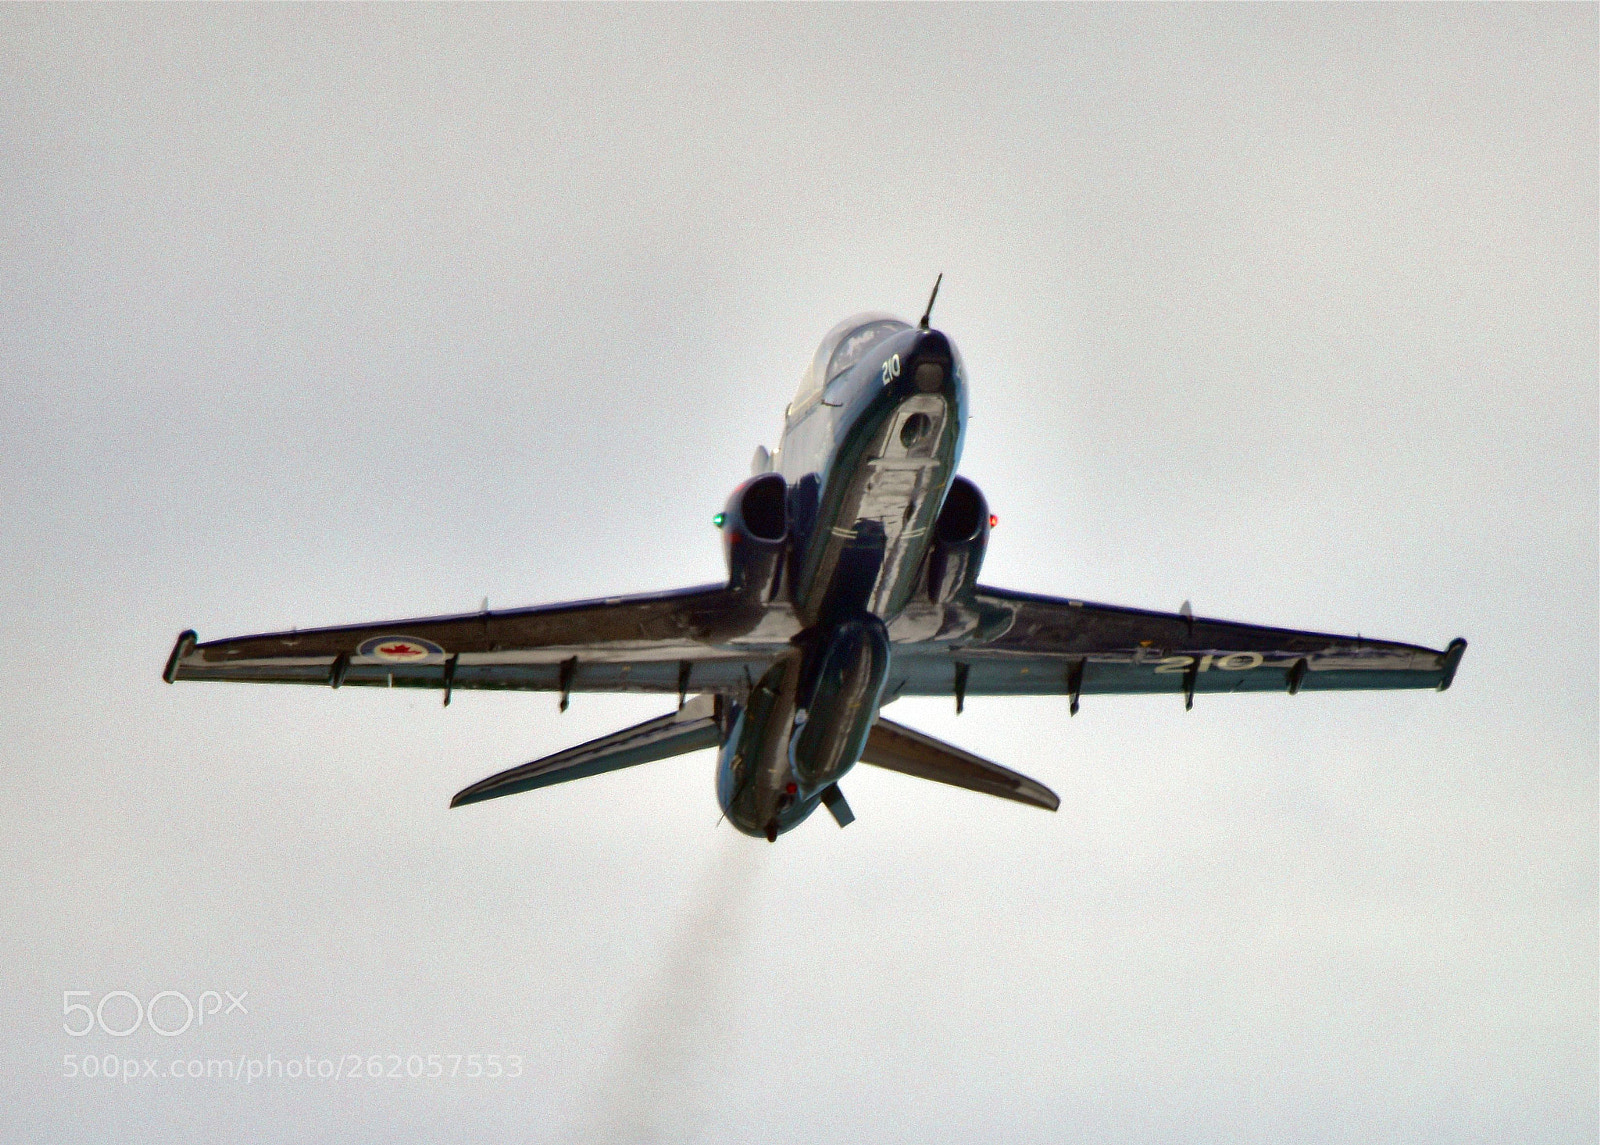 Nikon D810 + Sigma 150-600mm F5-6.3 DG OS HSM | C sample photo. Canadian air forces trainer photography